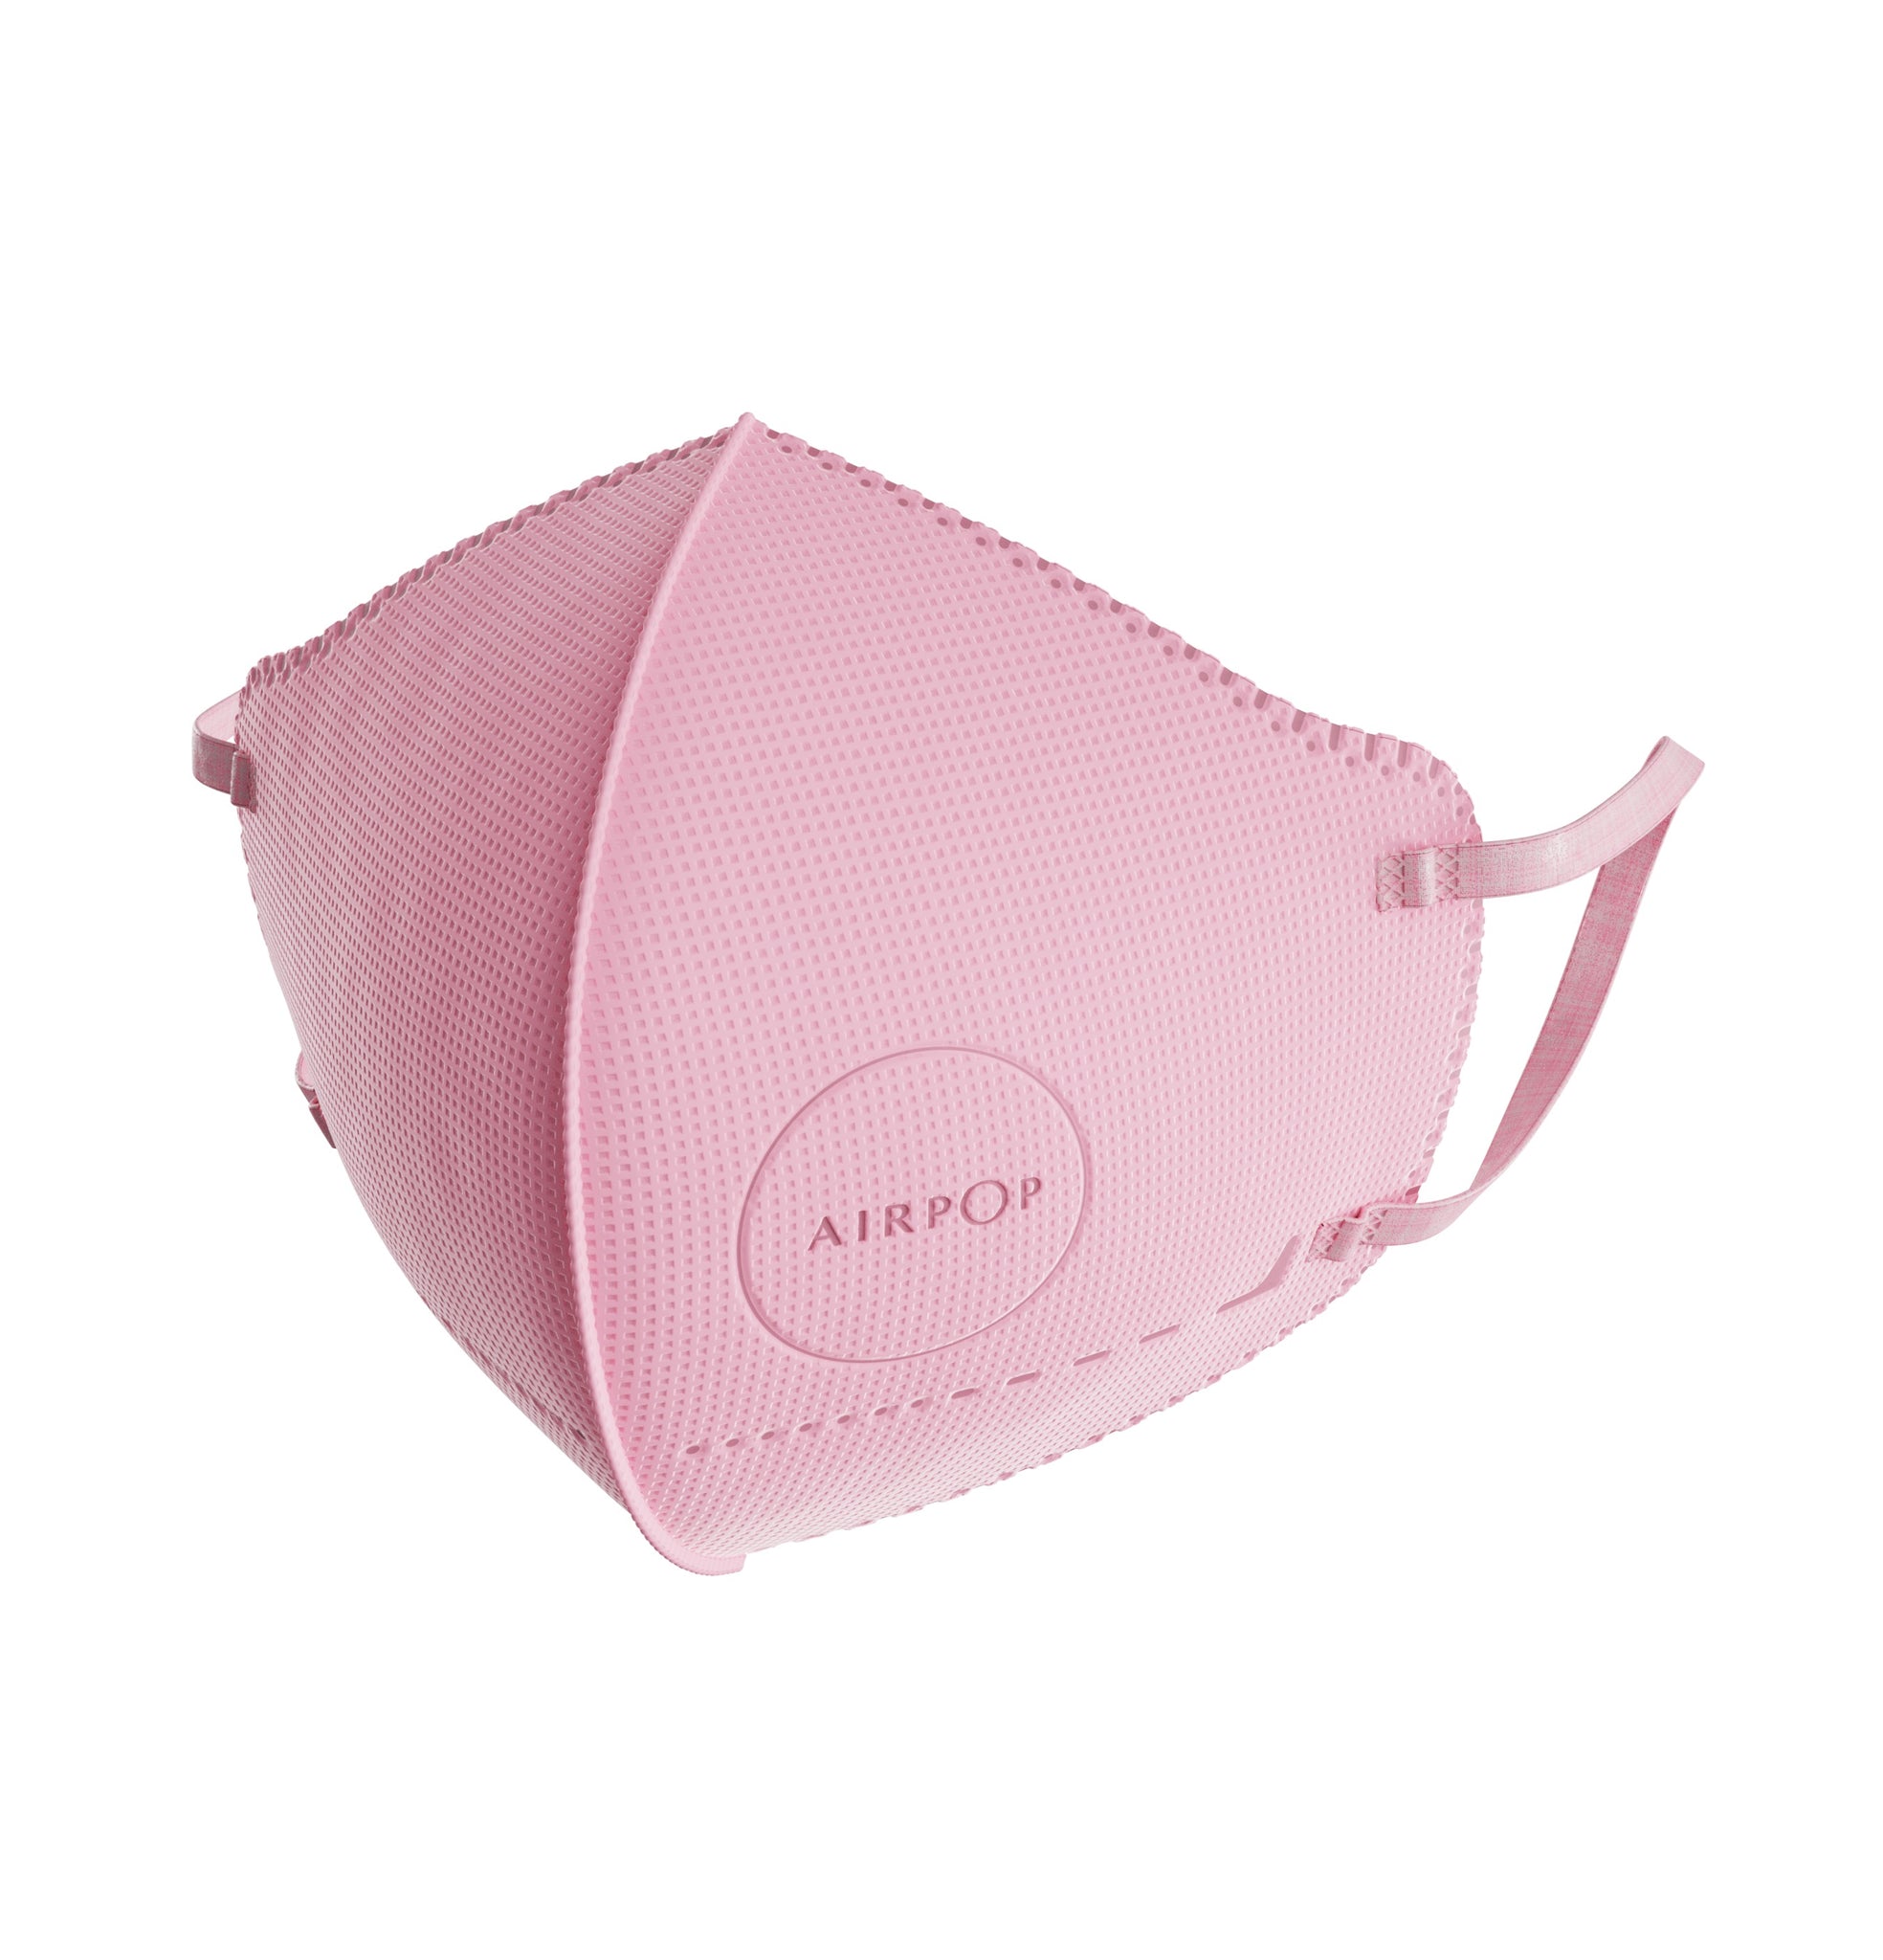 A breathable and comfortable AirPop Kids Mask on a white background.